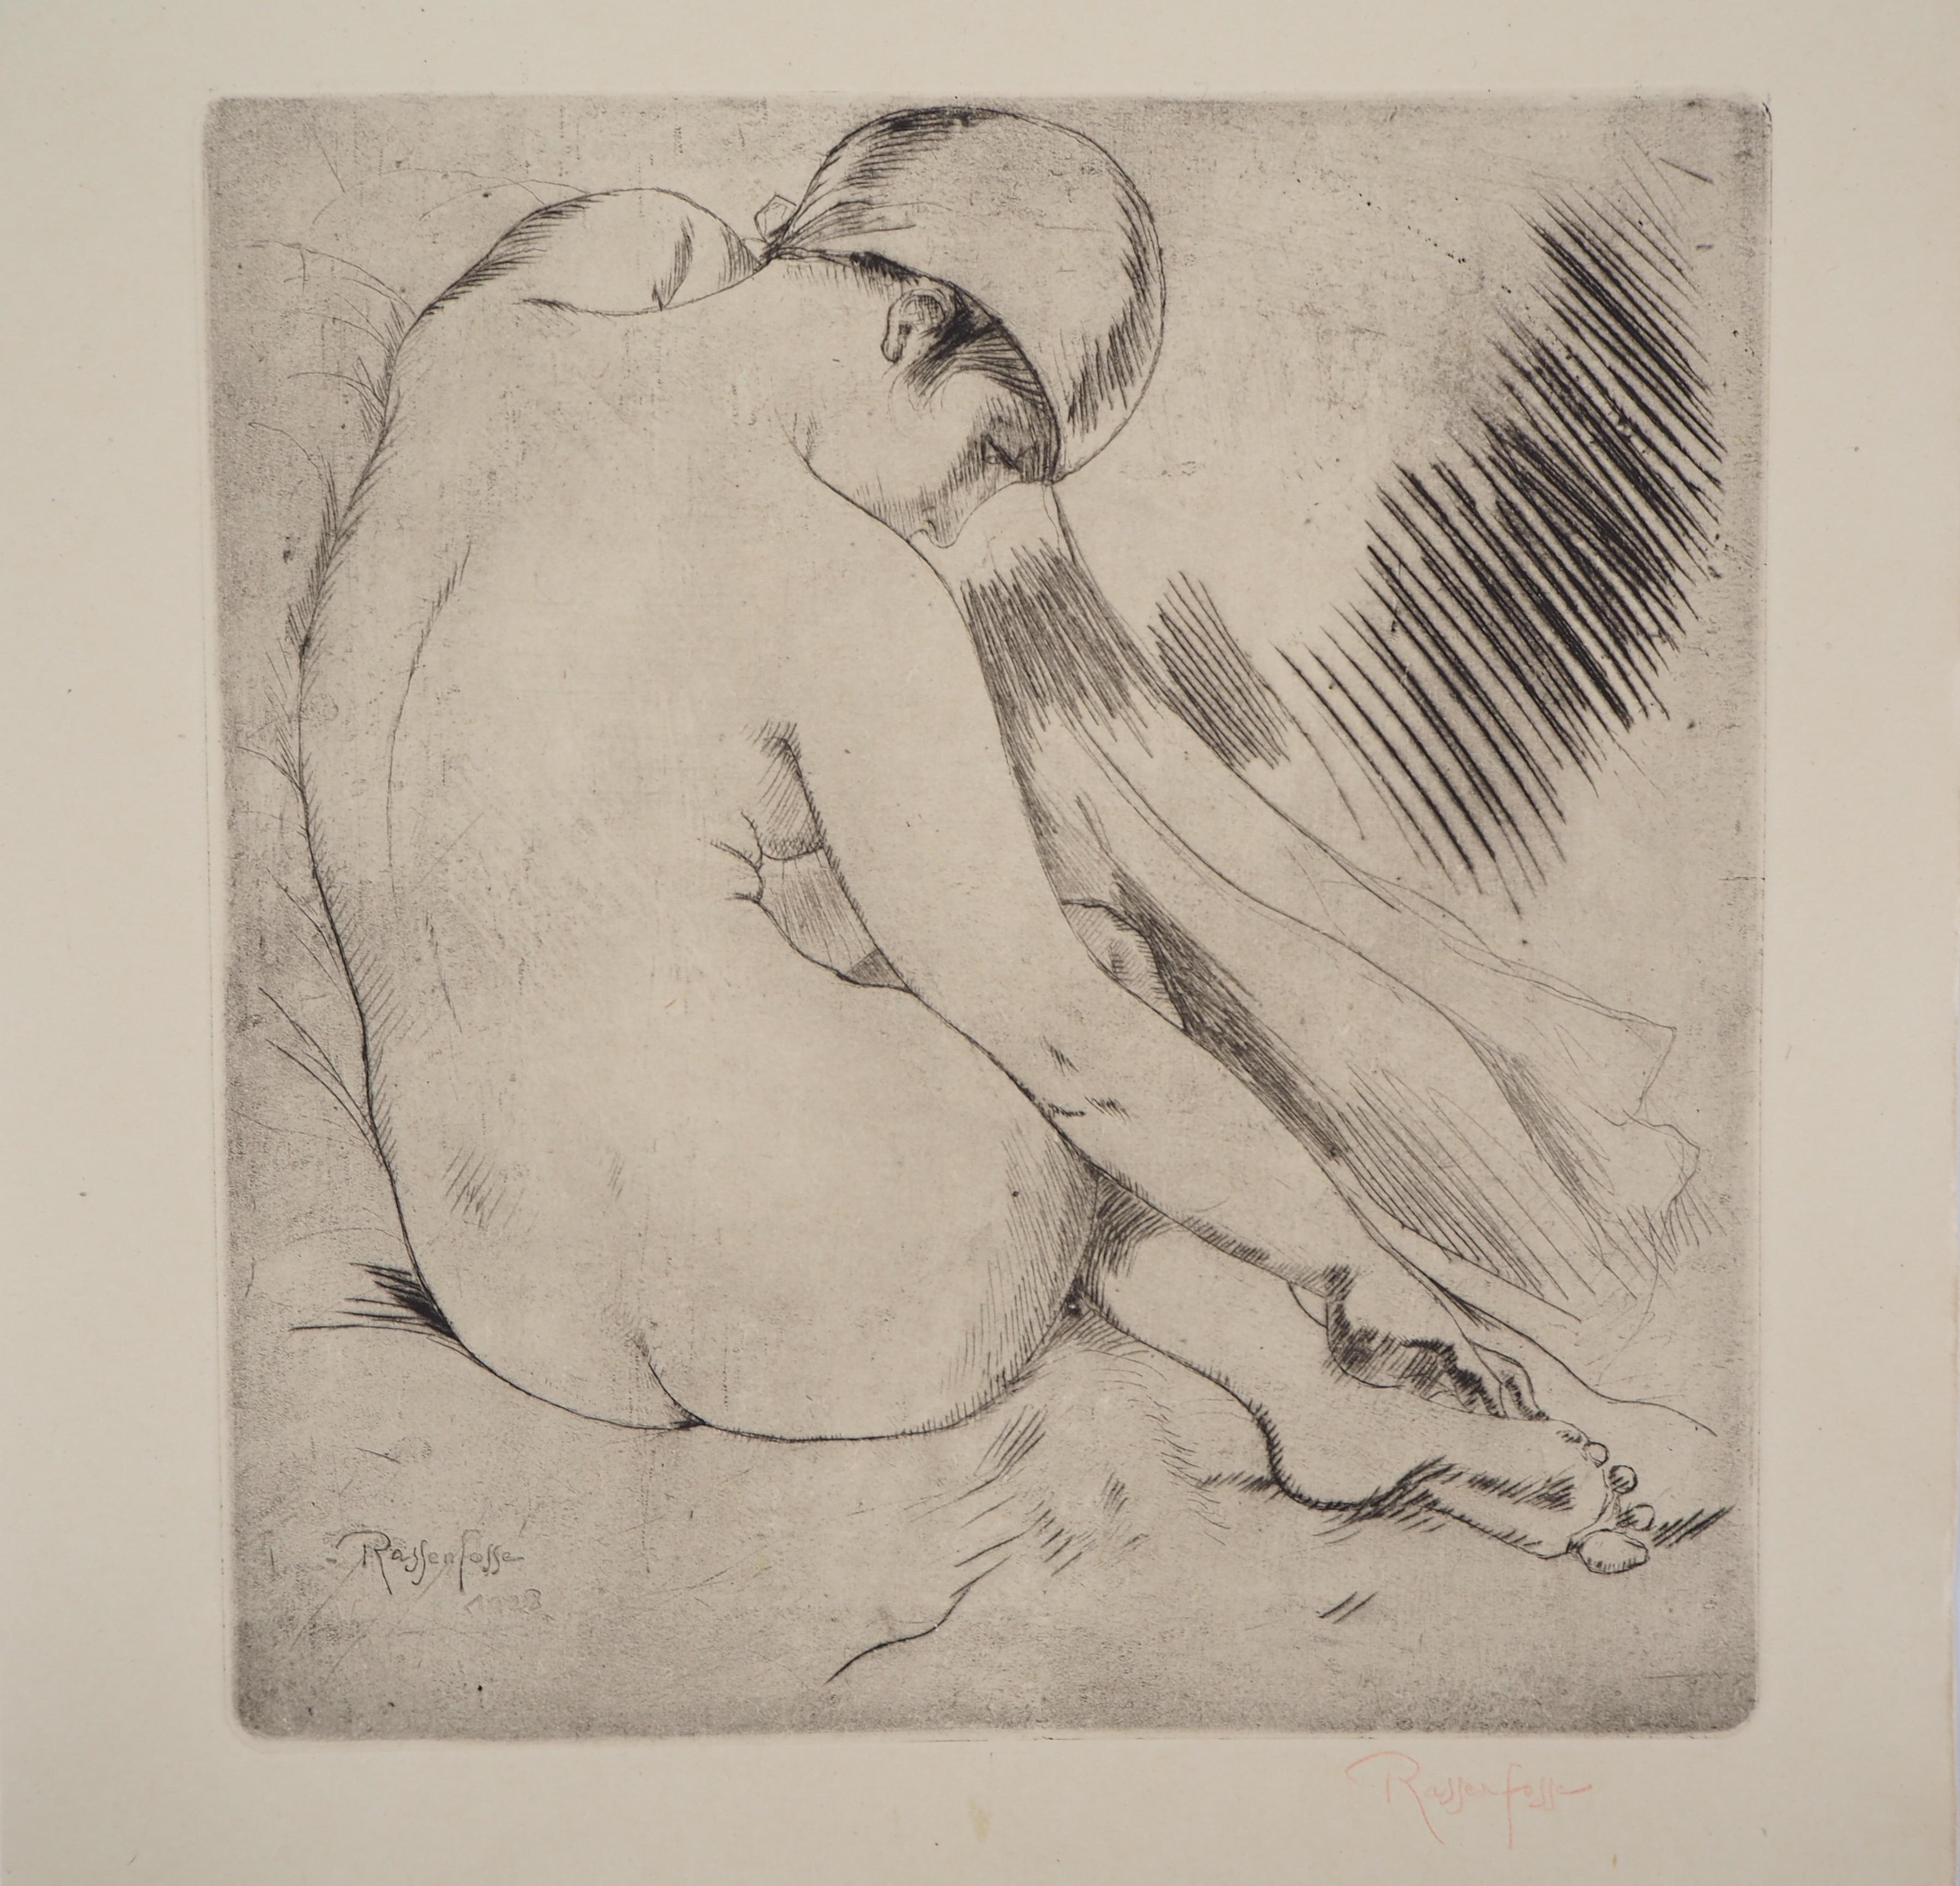 Armand Rassenfosse (1862-1934)
Nude with a Scarf, 1928

Original drypoint etching
Signed with a crayon and also plate signed
Dated 1928
On vellum 28 x 24 cm (c. 11 x 9,4 in)

Excellent condition